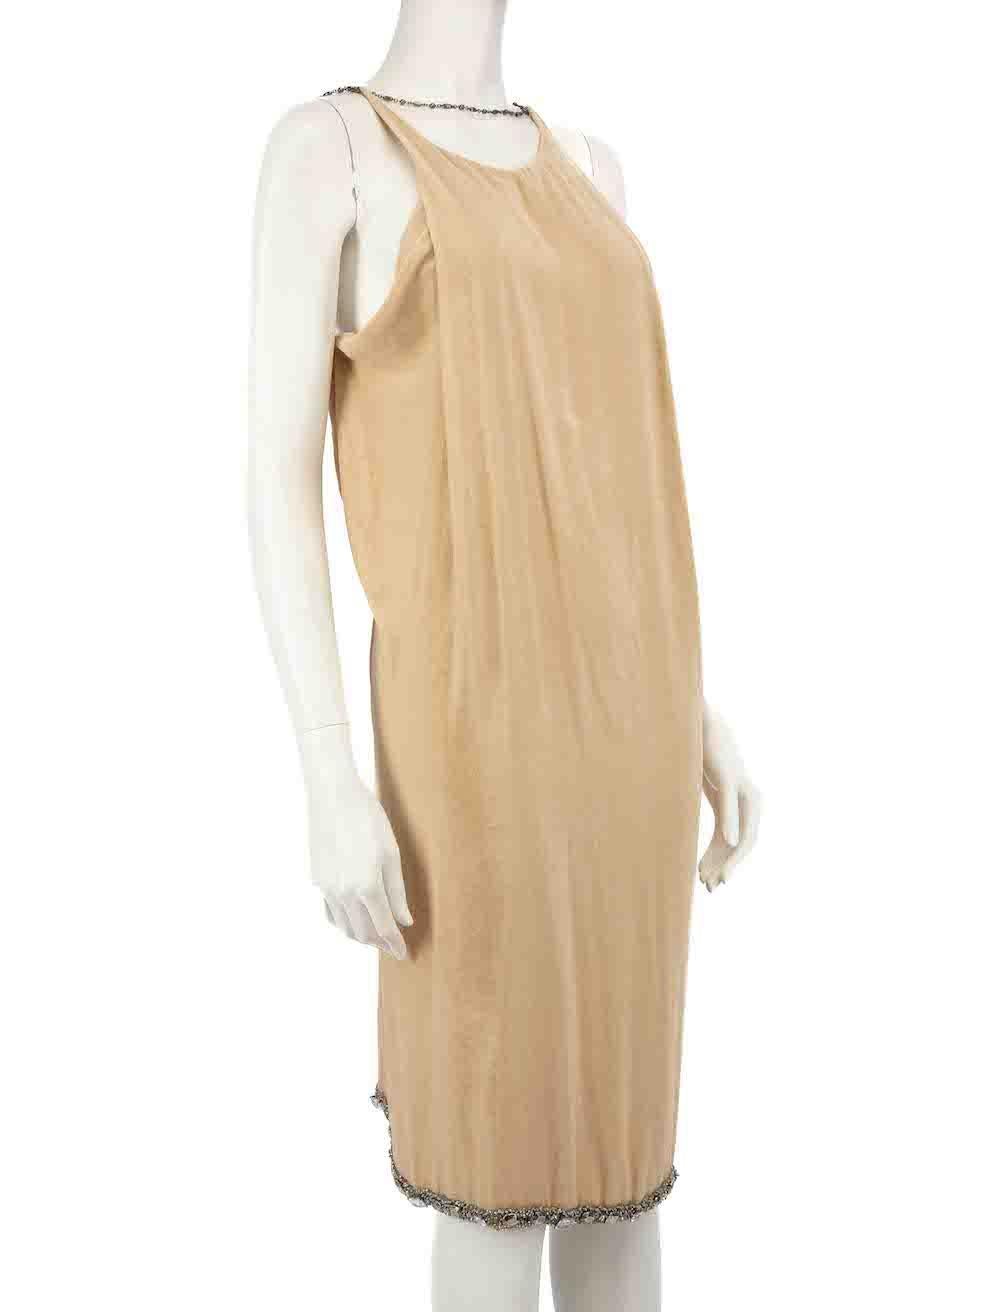 CONDITION is Very good. Minimal wear to dress is evident. Minimal wear to the inside bust with two small plucks to the weave which does not show on the outside of the dress on this used Bottega Veneta designer resale item.
 
 
 
 Details
 
 
 Beige
